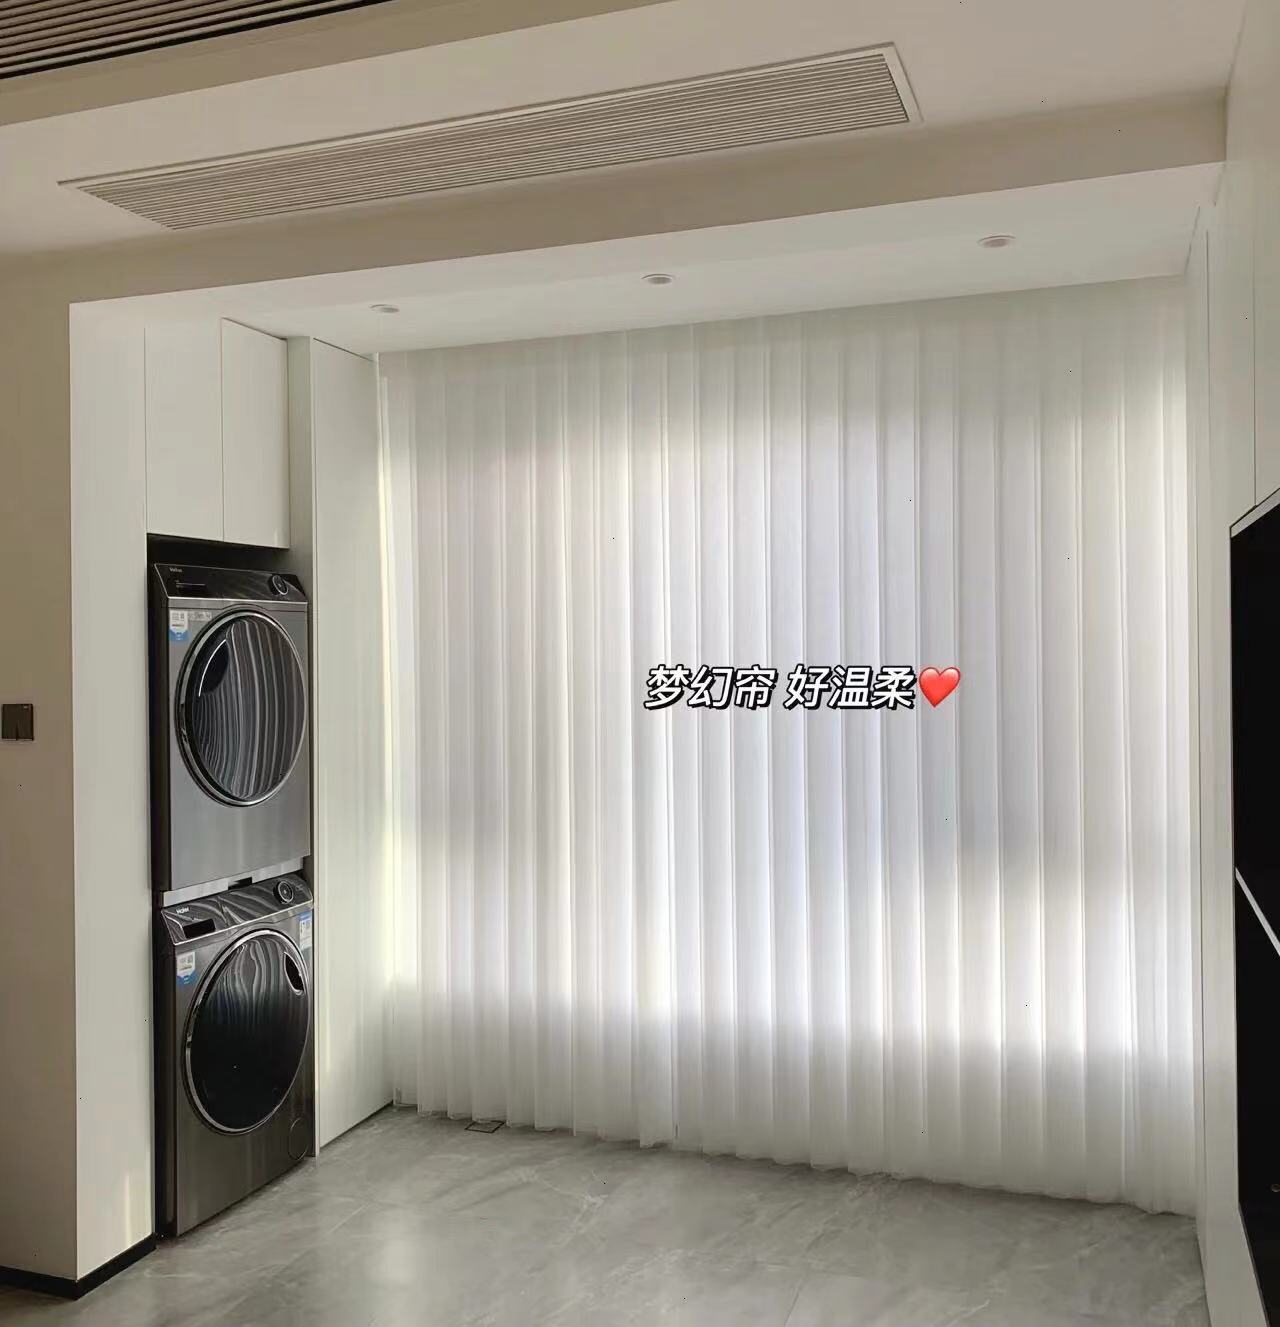 Fantasy Curtain Manufacturer Fantasy Curtain Customized Fantasy Curtain Finished Product Suitable for Living Room Bedroom Balcony Can Also Be Electric